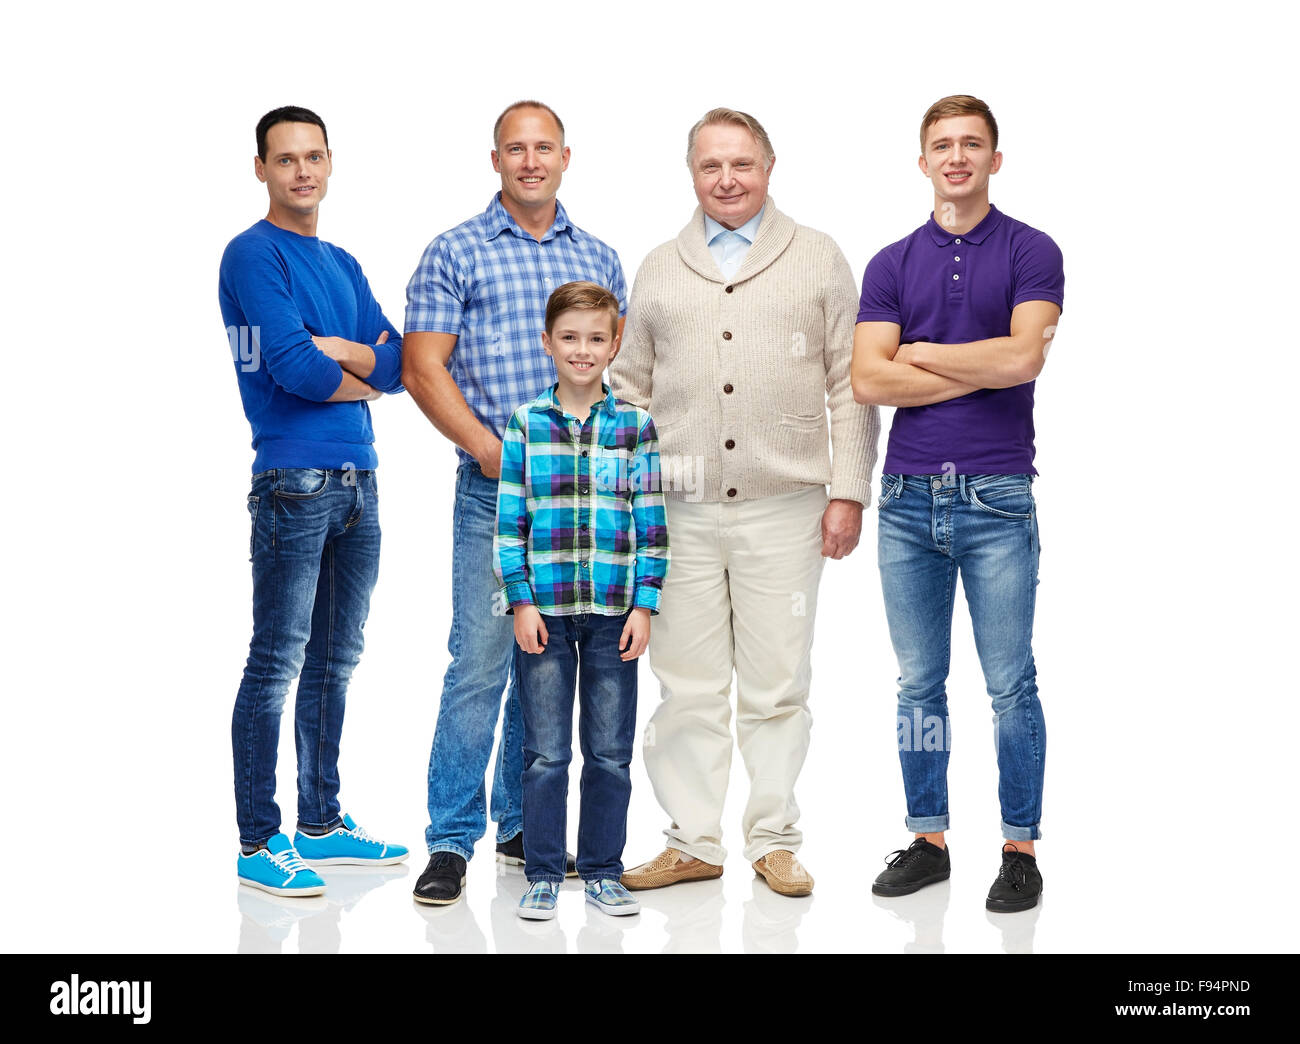 group of smiling men and boy Stock Photo